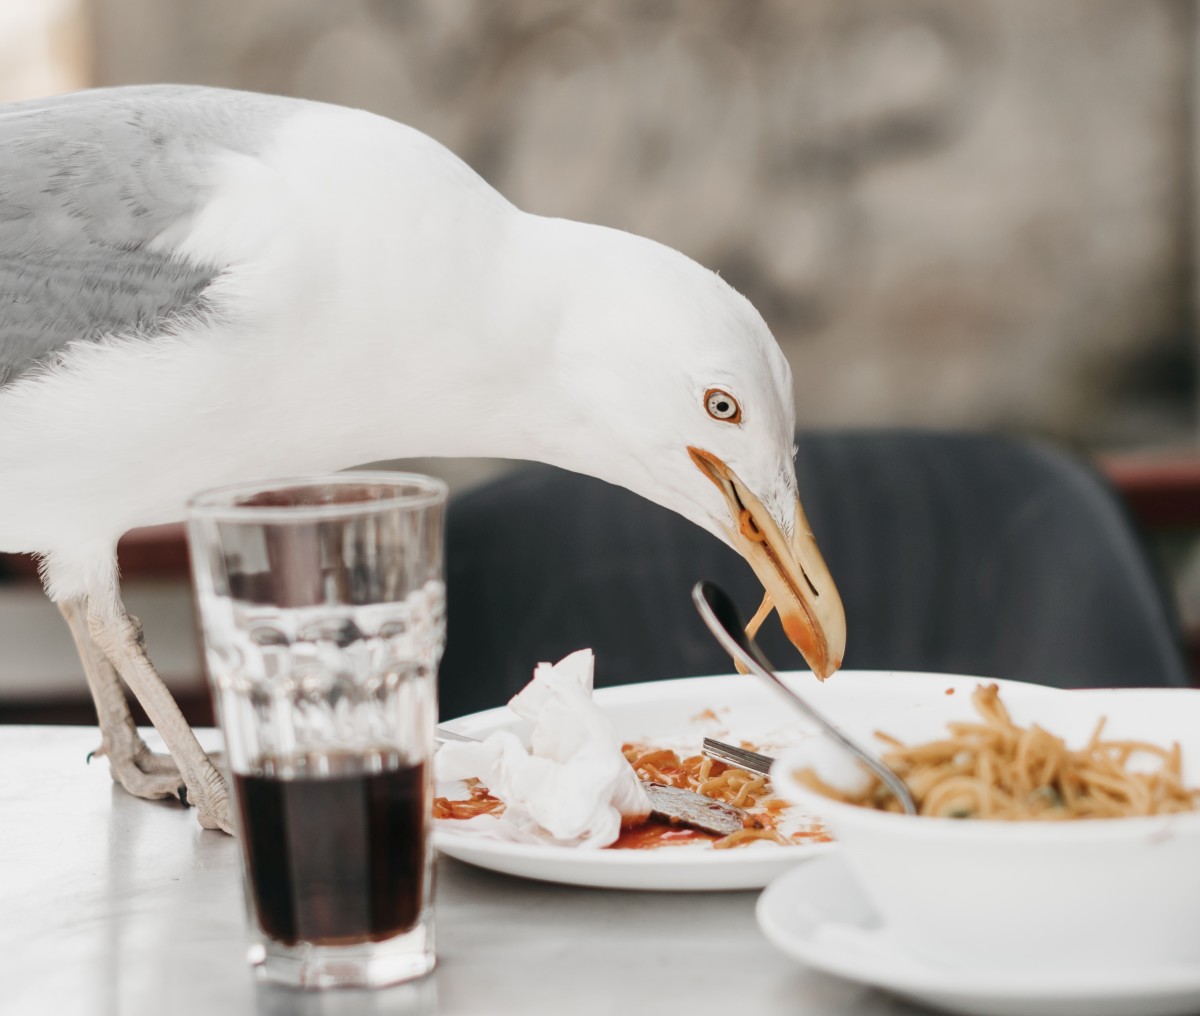 How to Stop Seagulls From Stealing Your Food